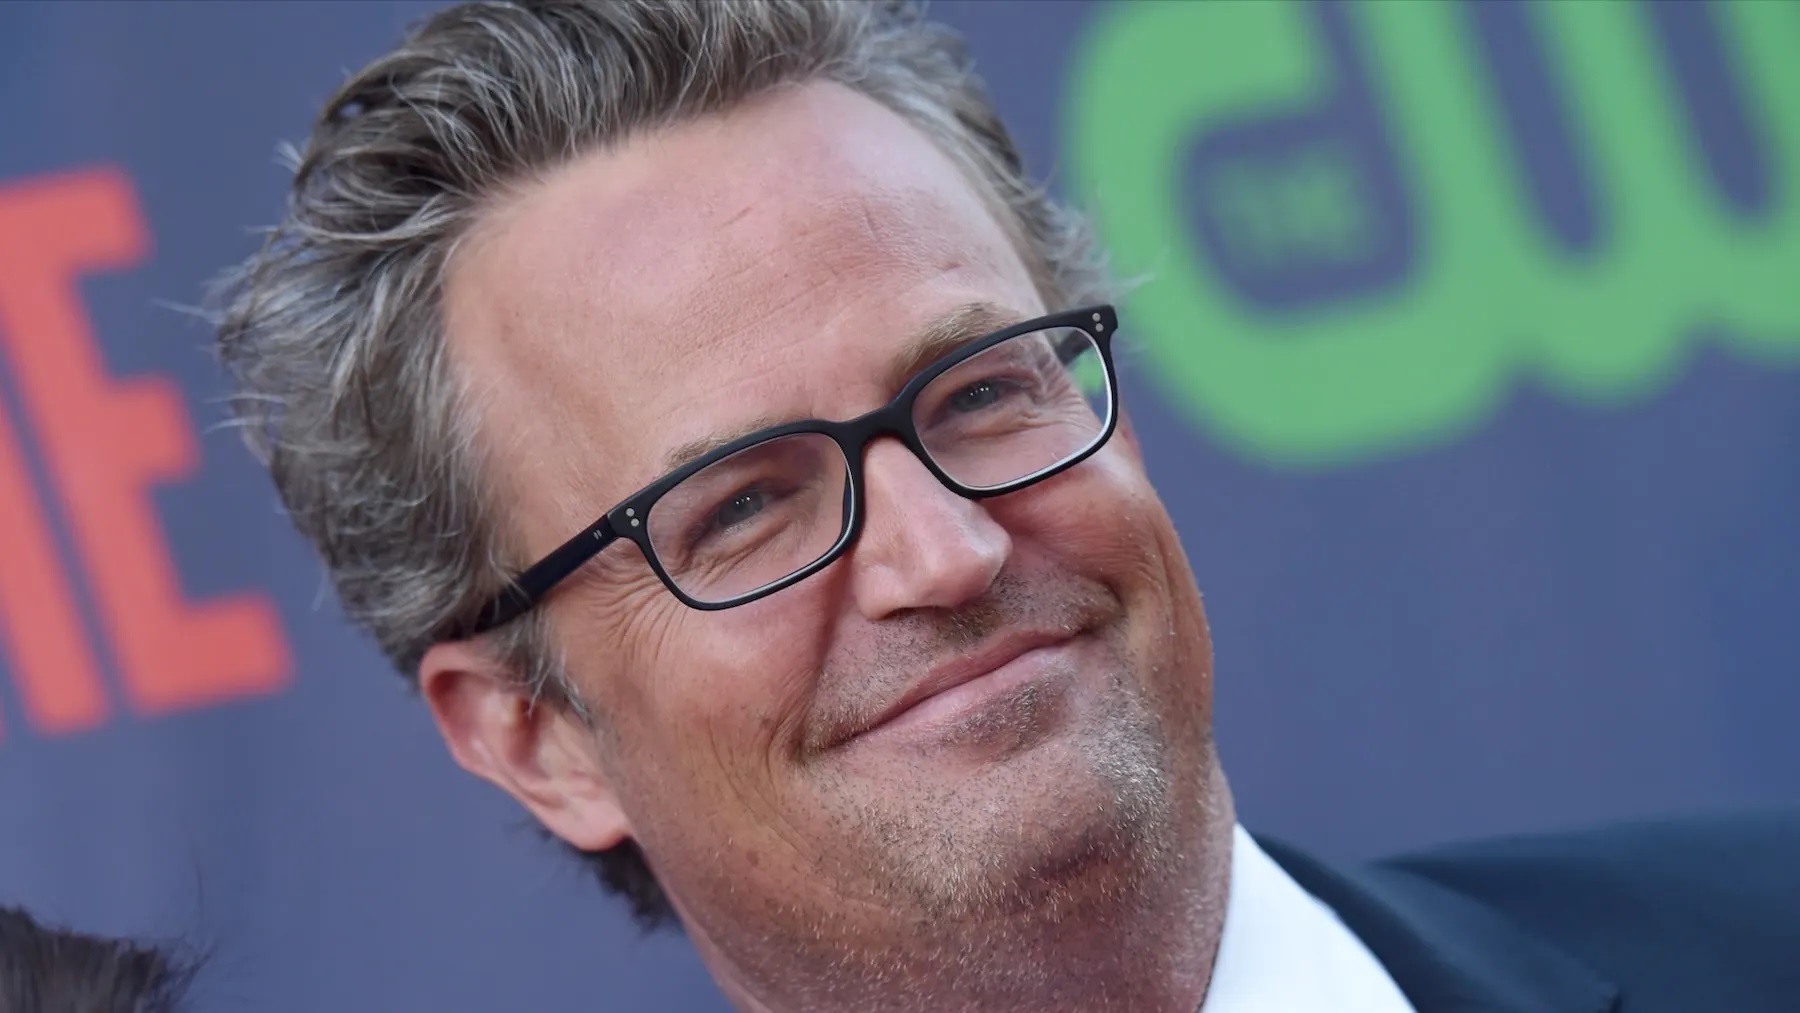 Matthew Perry’s Ambition To Start A Foundation To Help Those With Substance Abuse